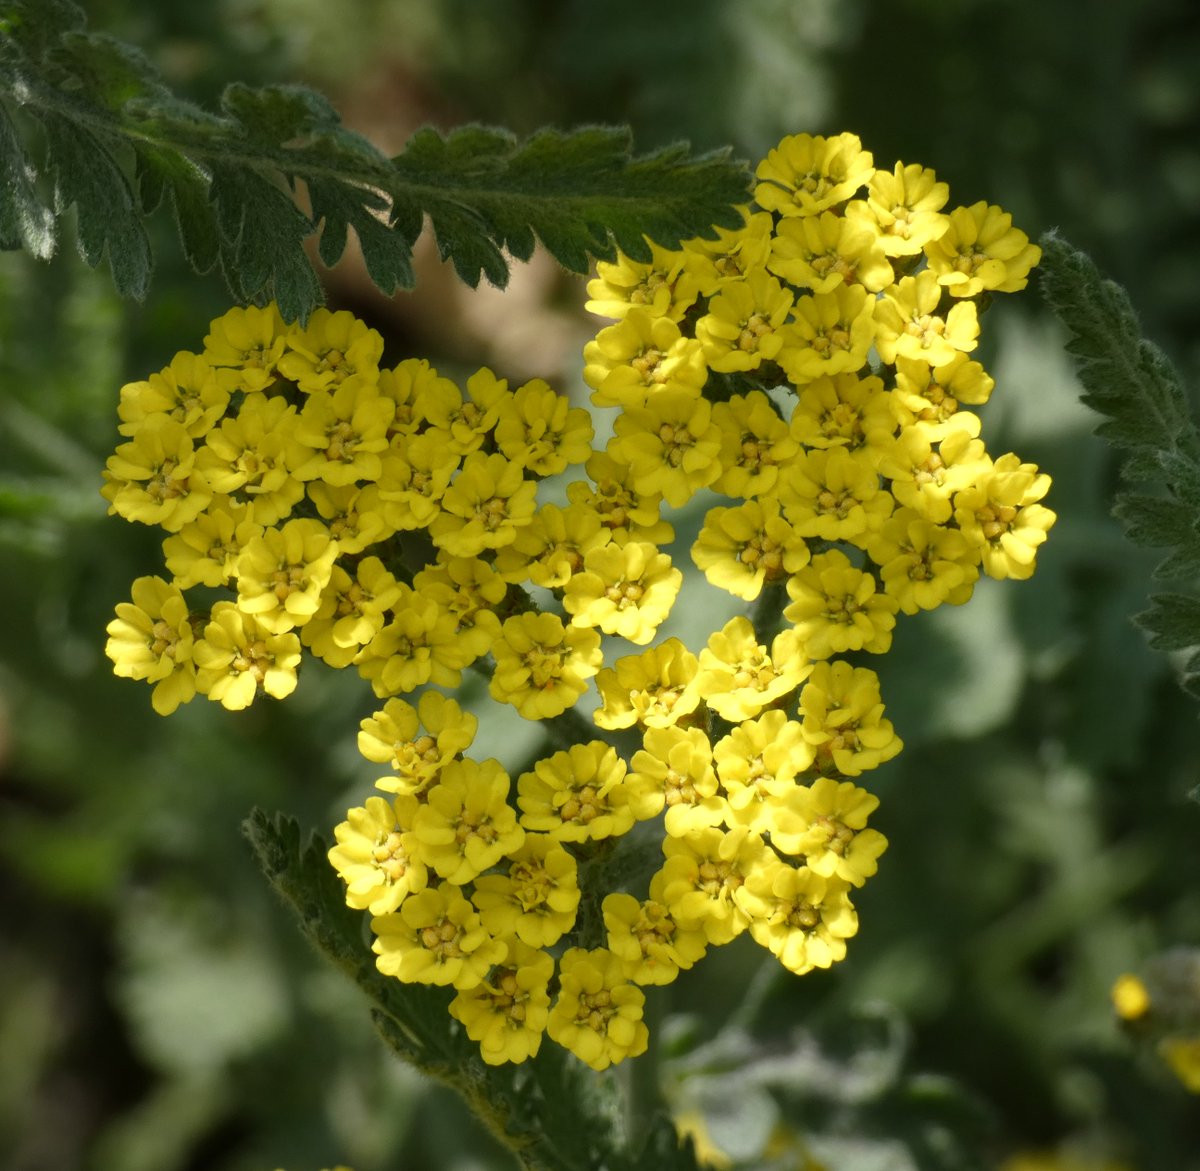 #Yarrow #blooms with such finesse, Gold coins on #corymb, quite the address. Each #flower, a sculptor's delicate touch, Serrated #leaves, #NaturesArt, as such. 🌼 #NaturePhotography #NaturePhoto #flowers #flowerlover #FlowerPhotography #photos #photography #自然 #花 #開花 #草花